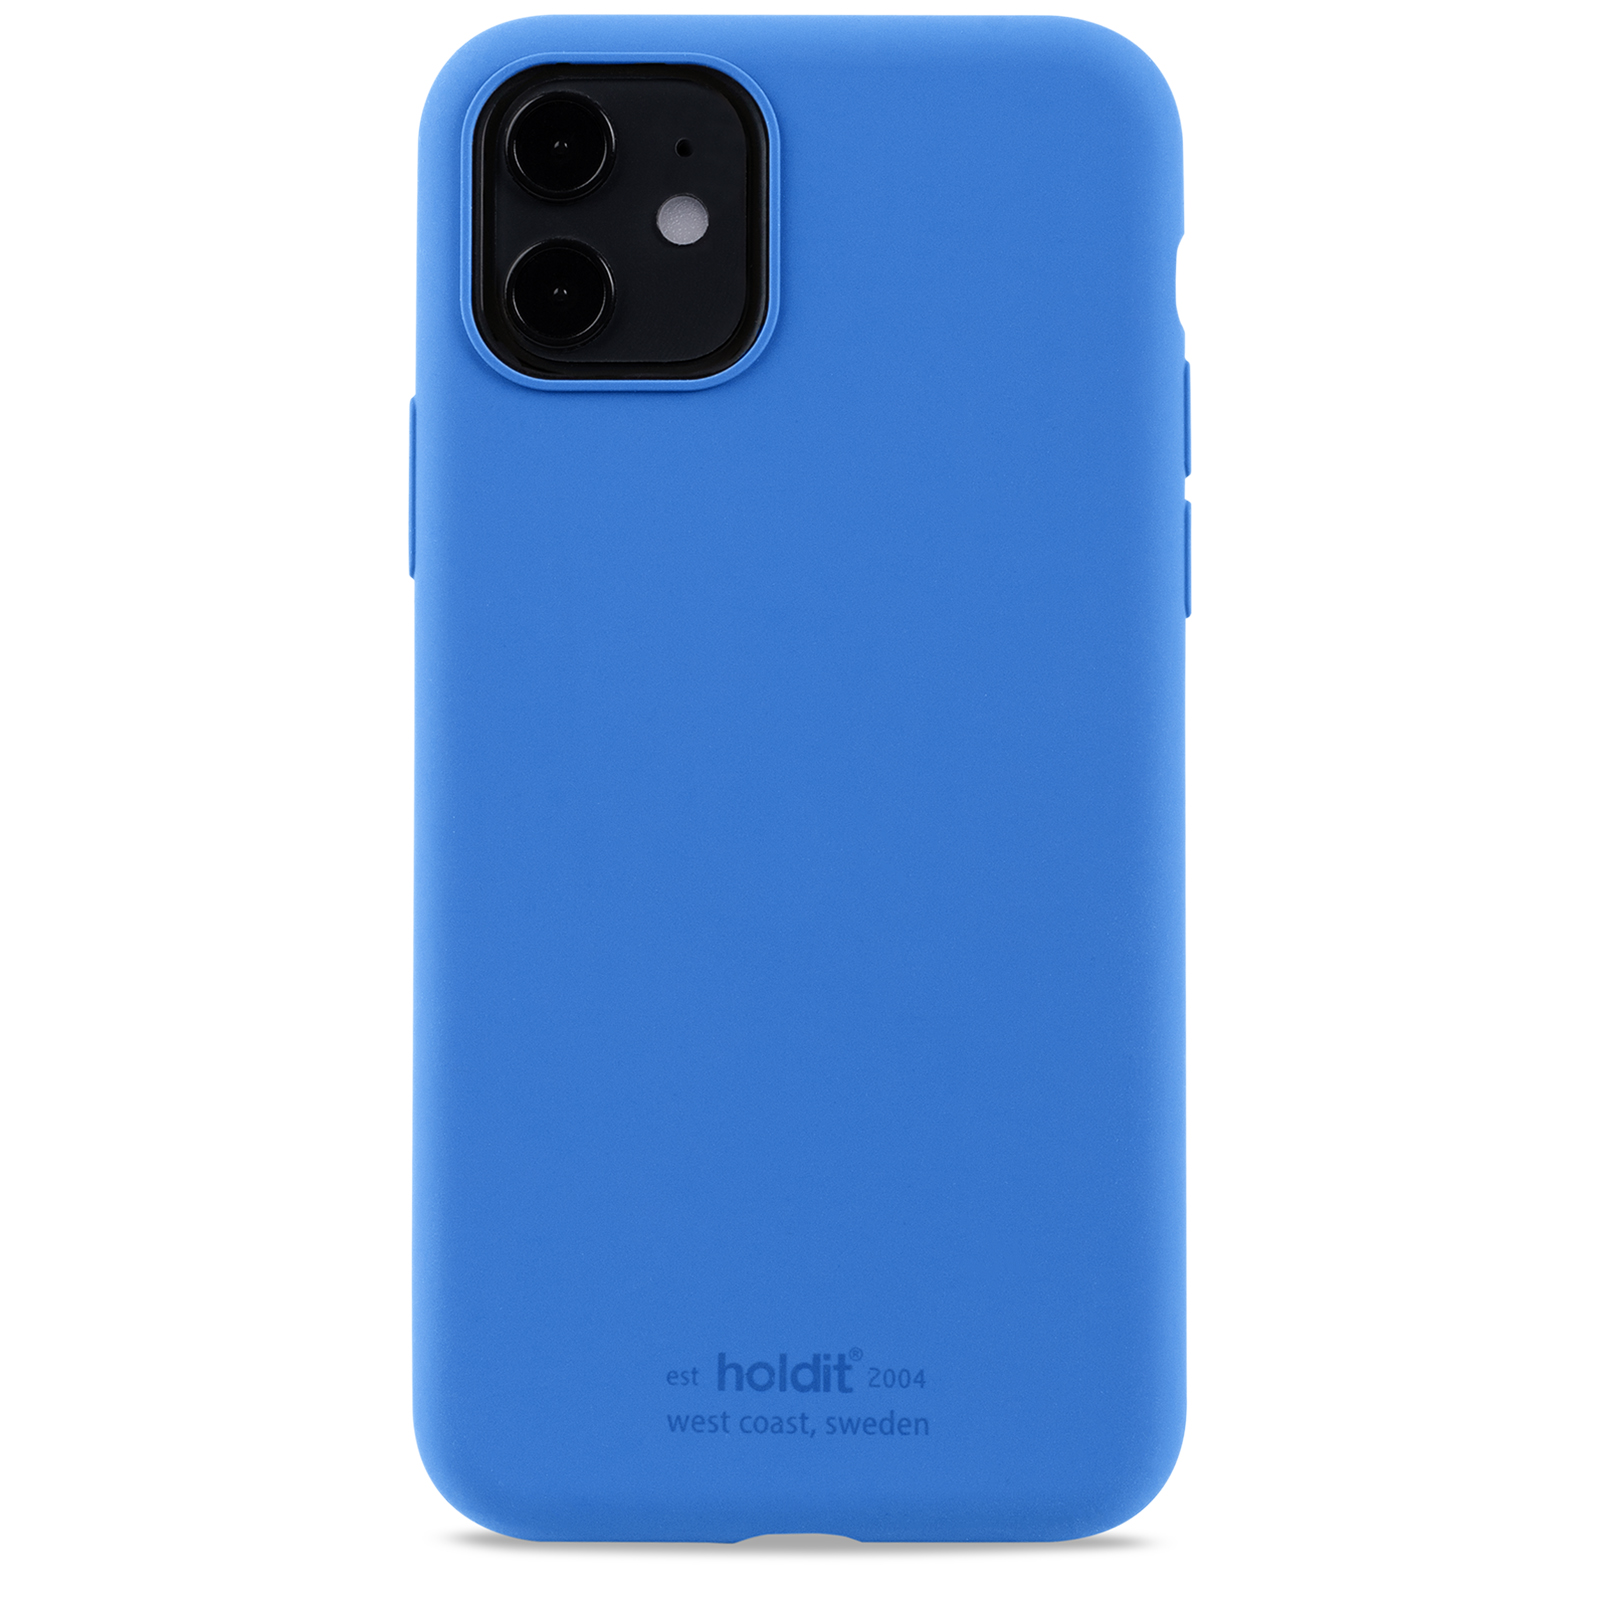 Iphone 11/XR Cover